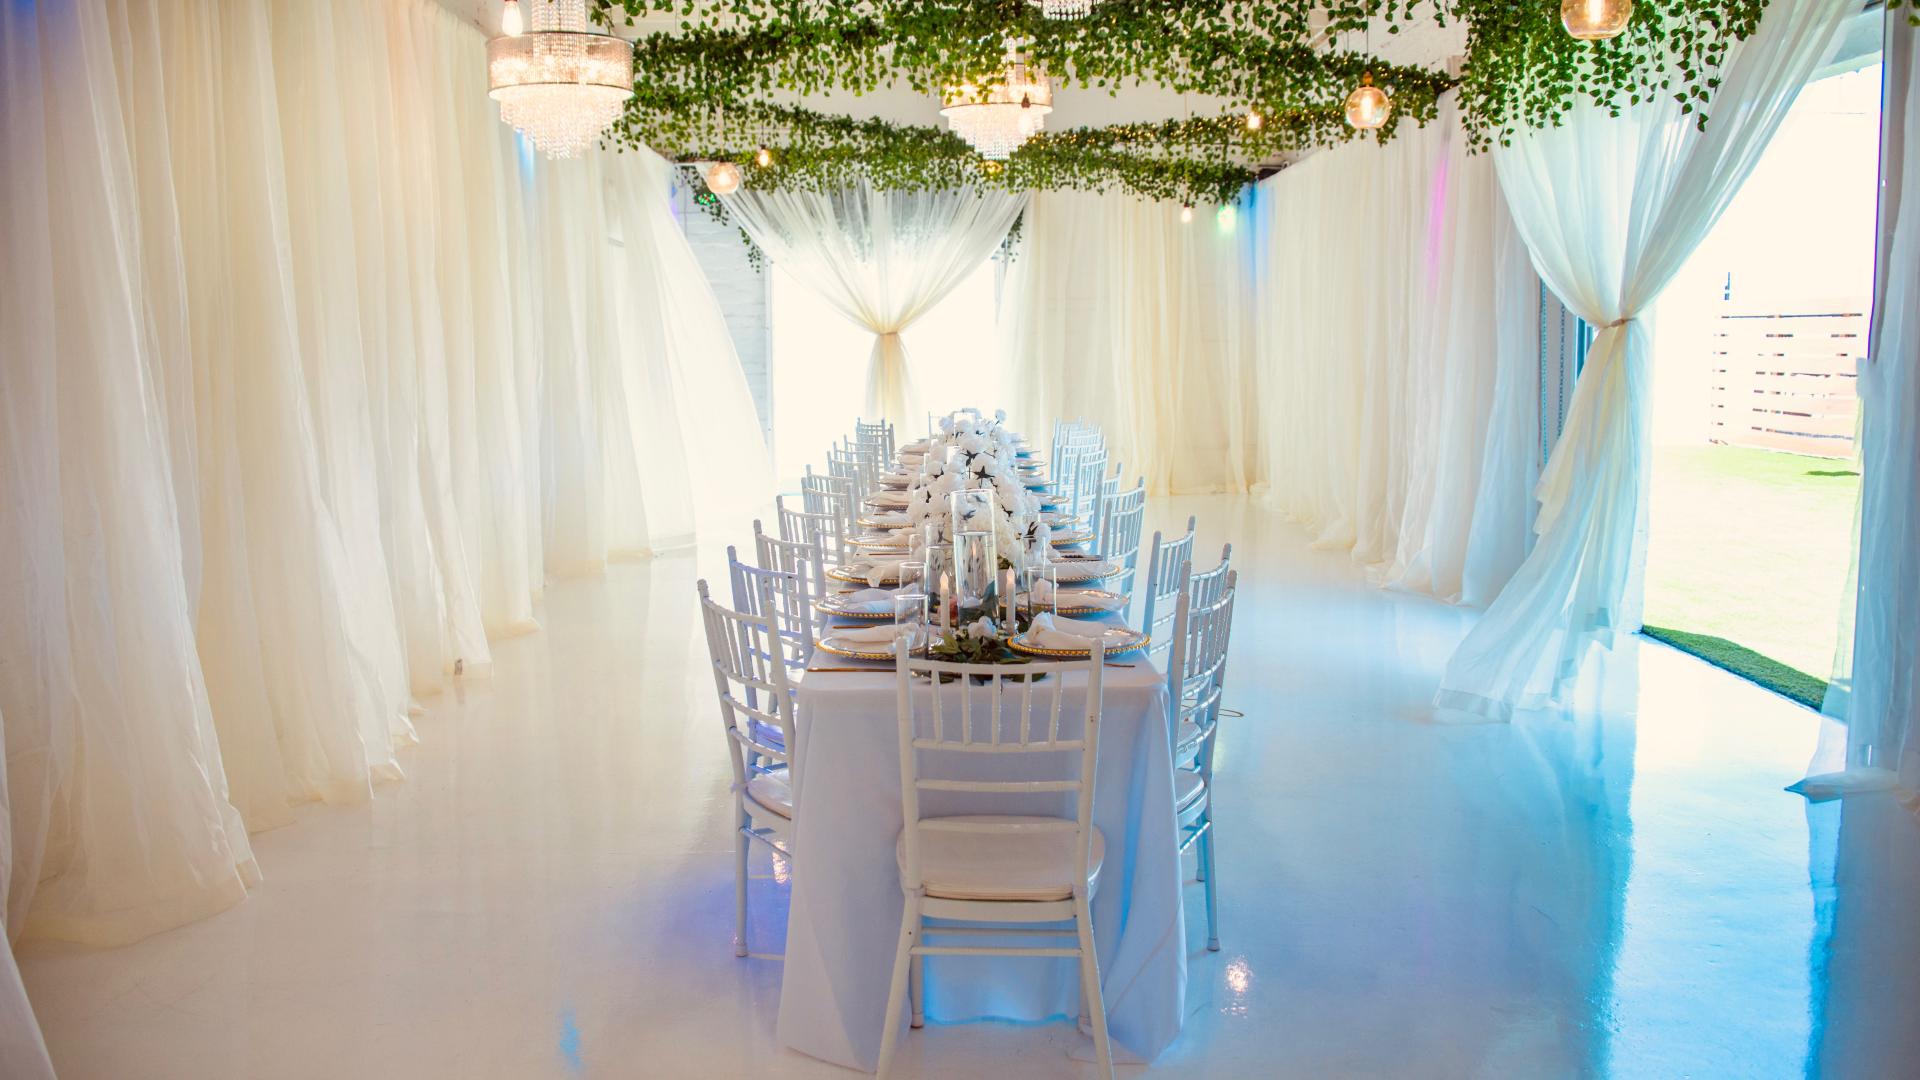 Small Engagement Party Venues for Rent in Washington, DC